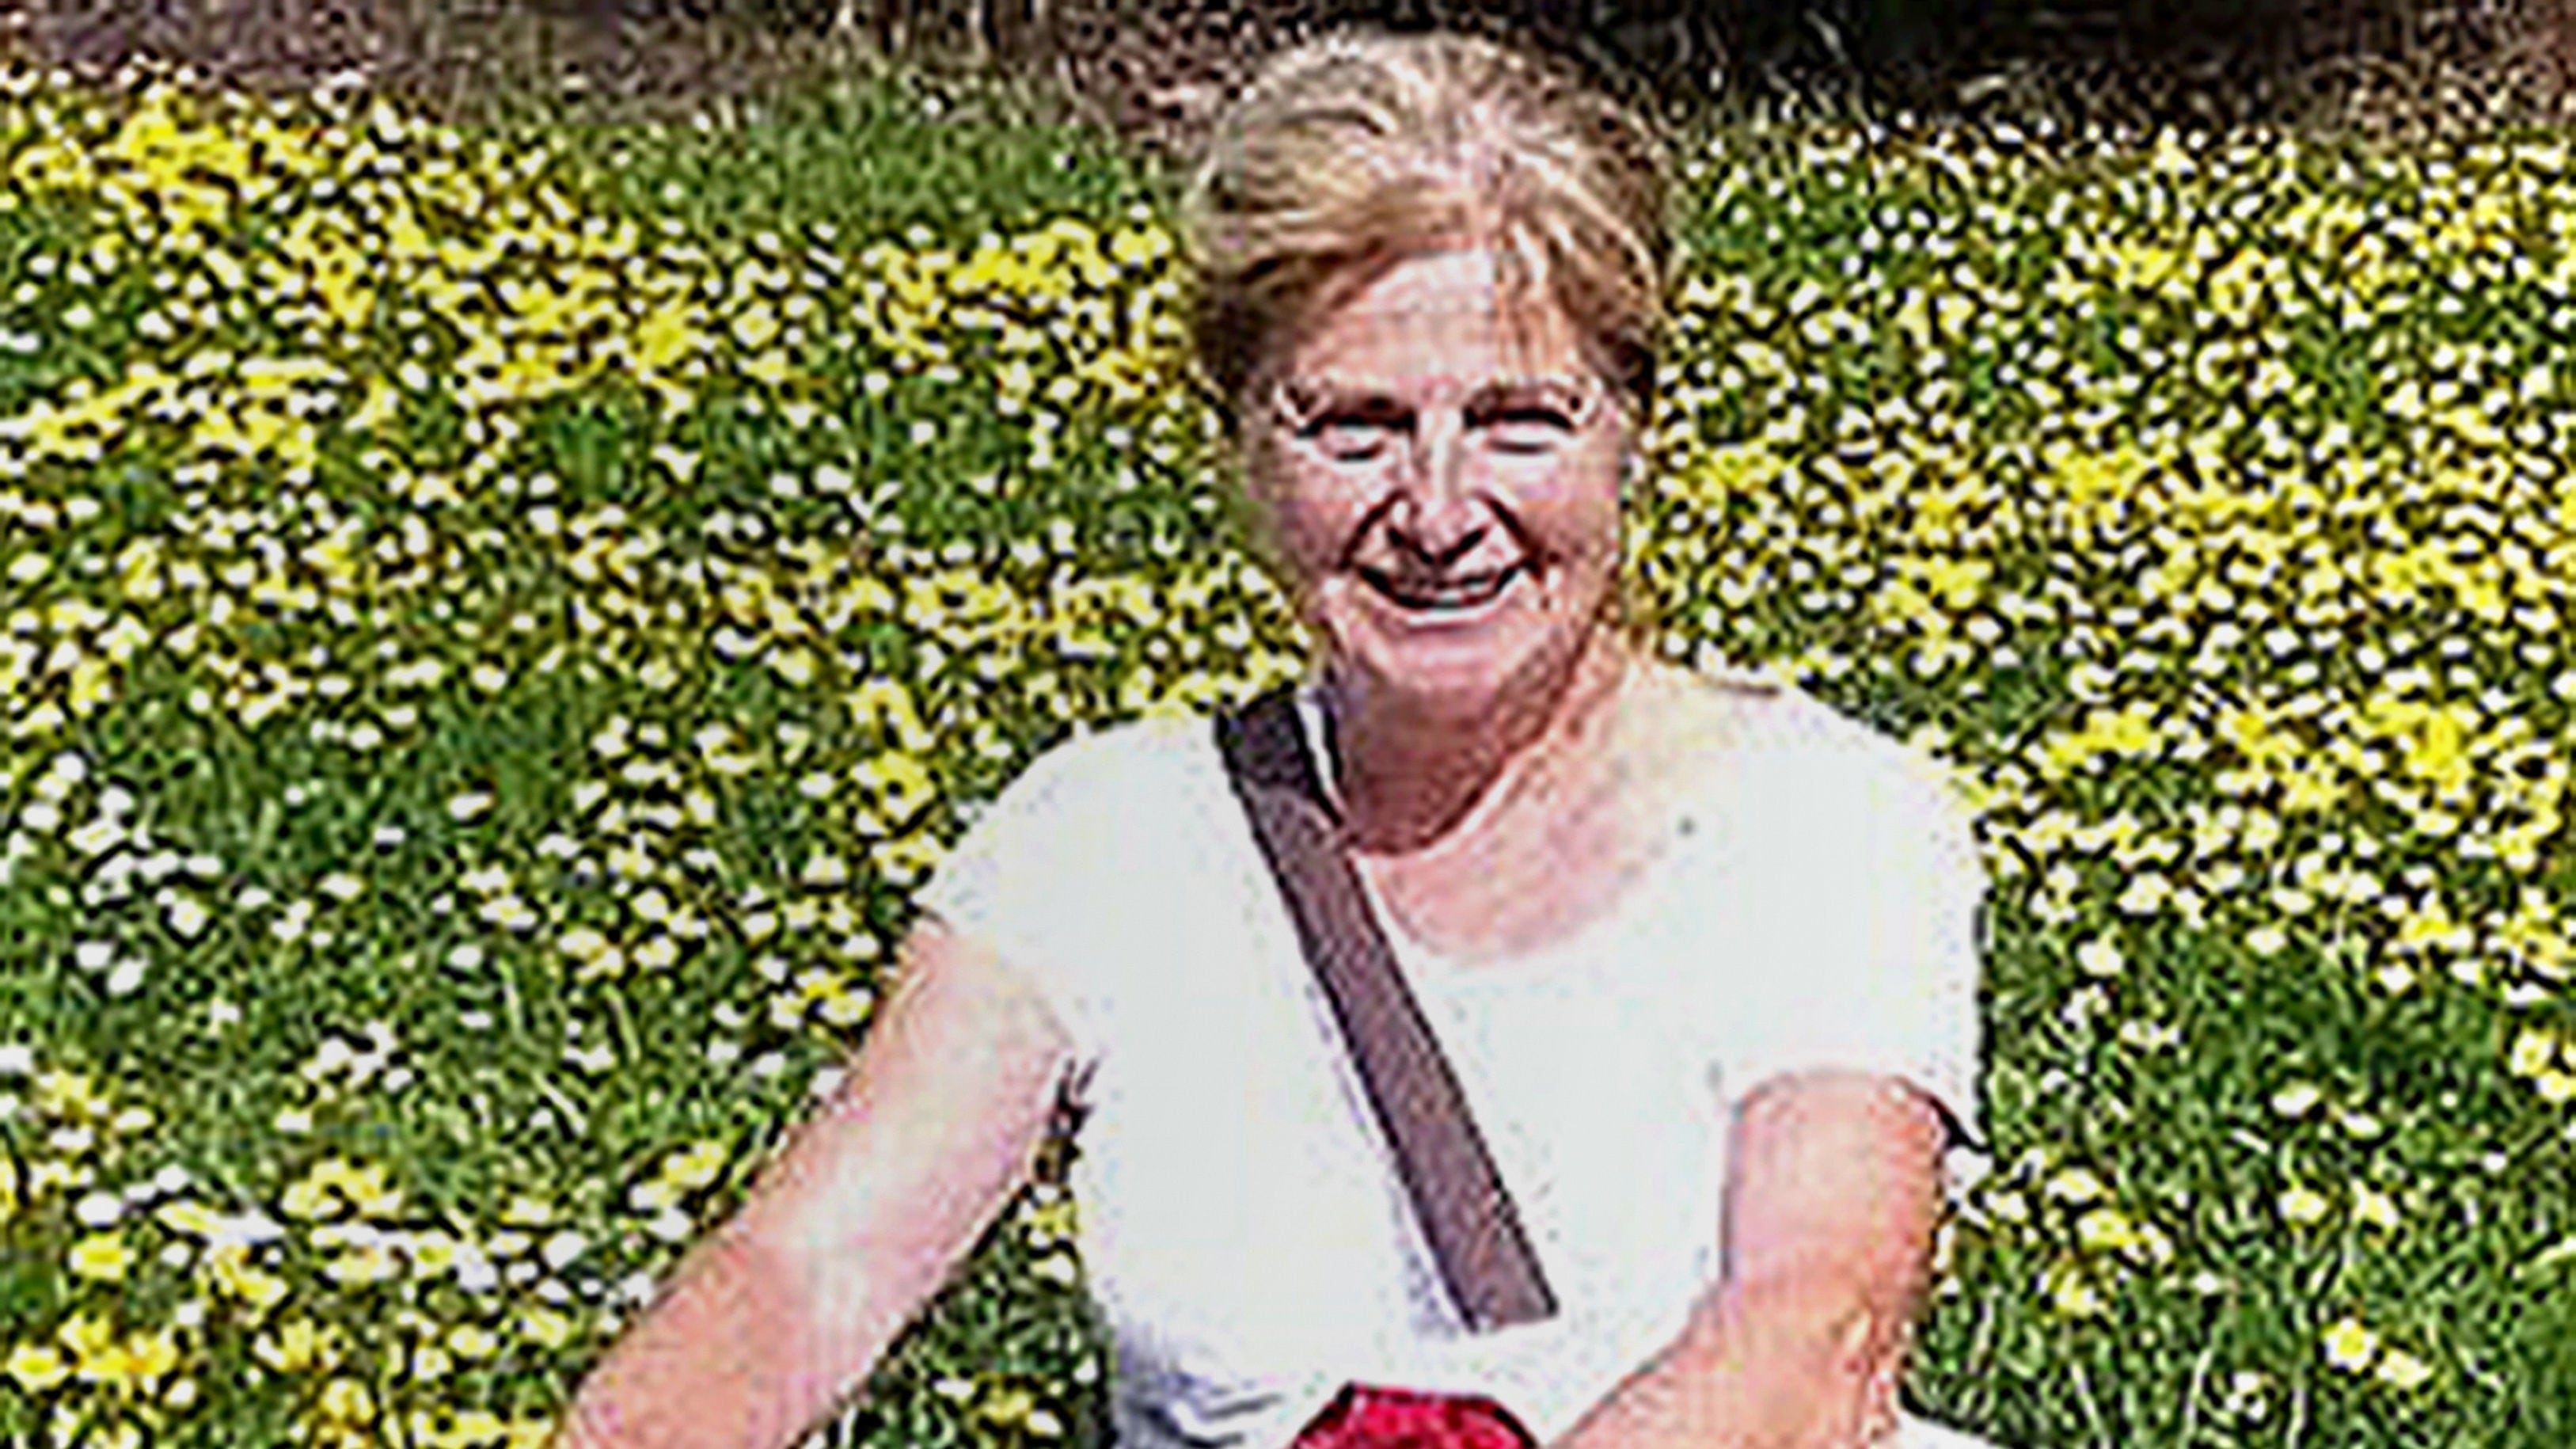 Danielle Carr-Gomm, 71, had been attending an event promoting Paida Lajin therapy in Wiltshire in 2016